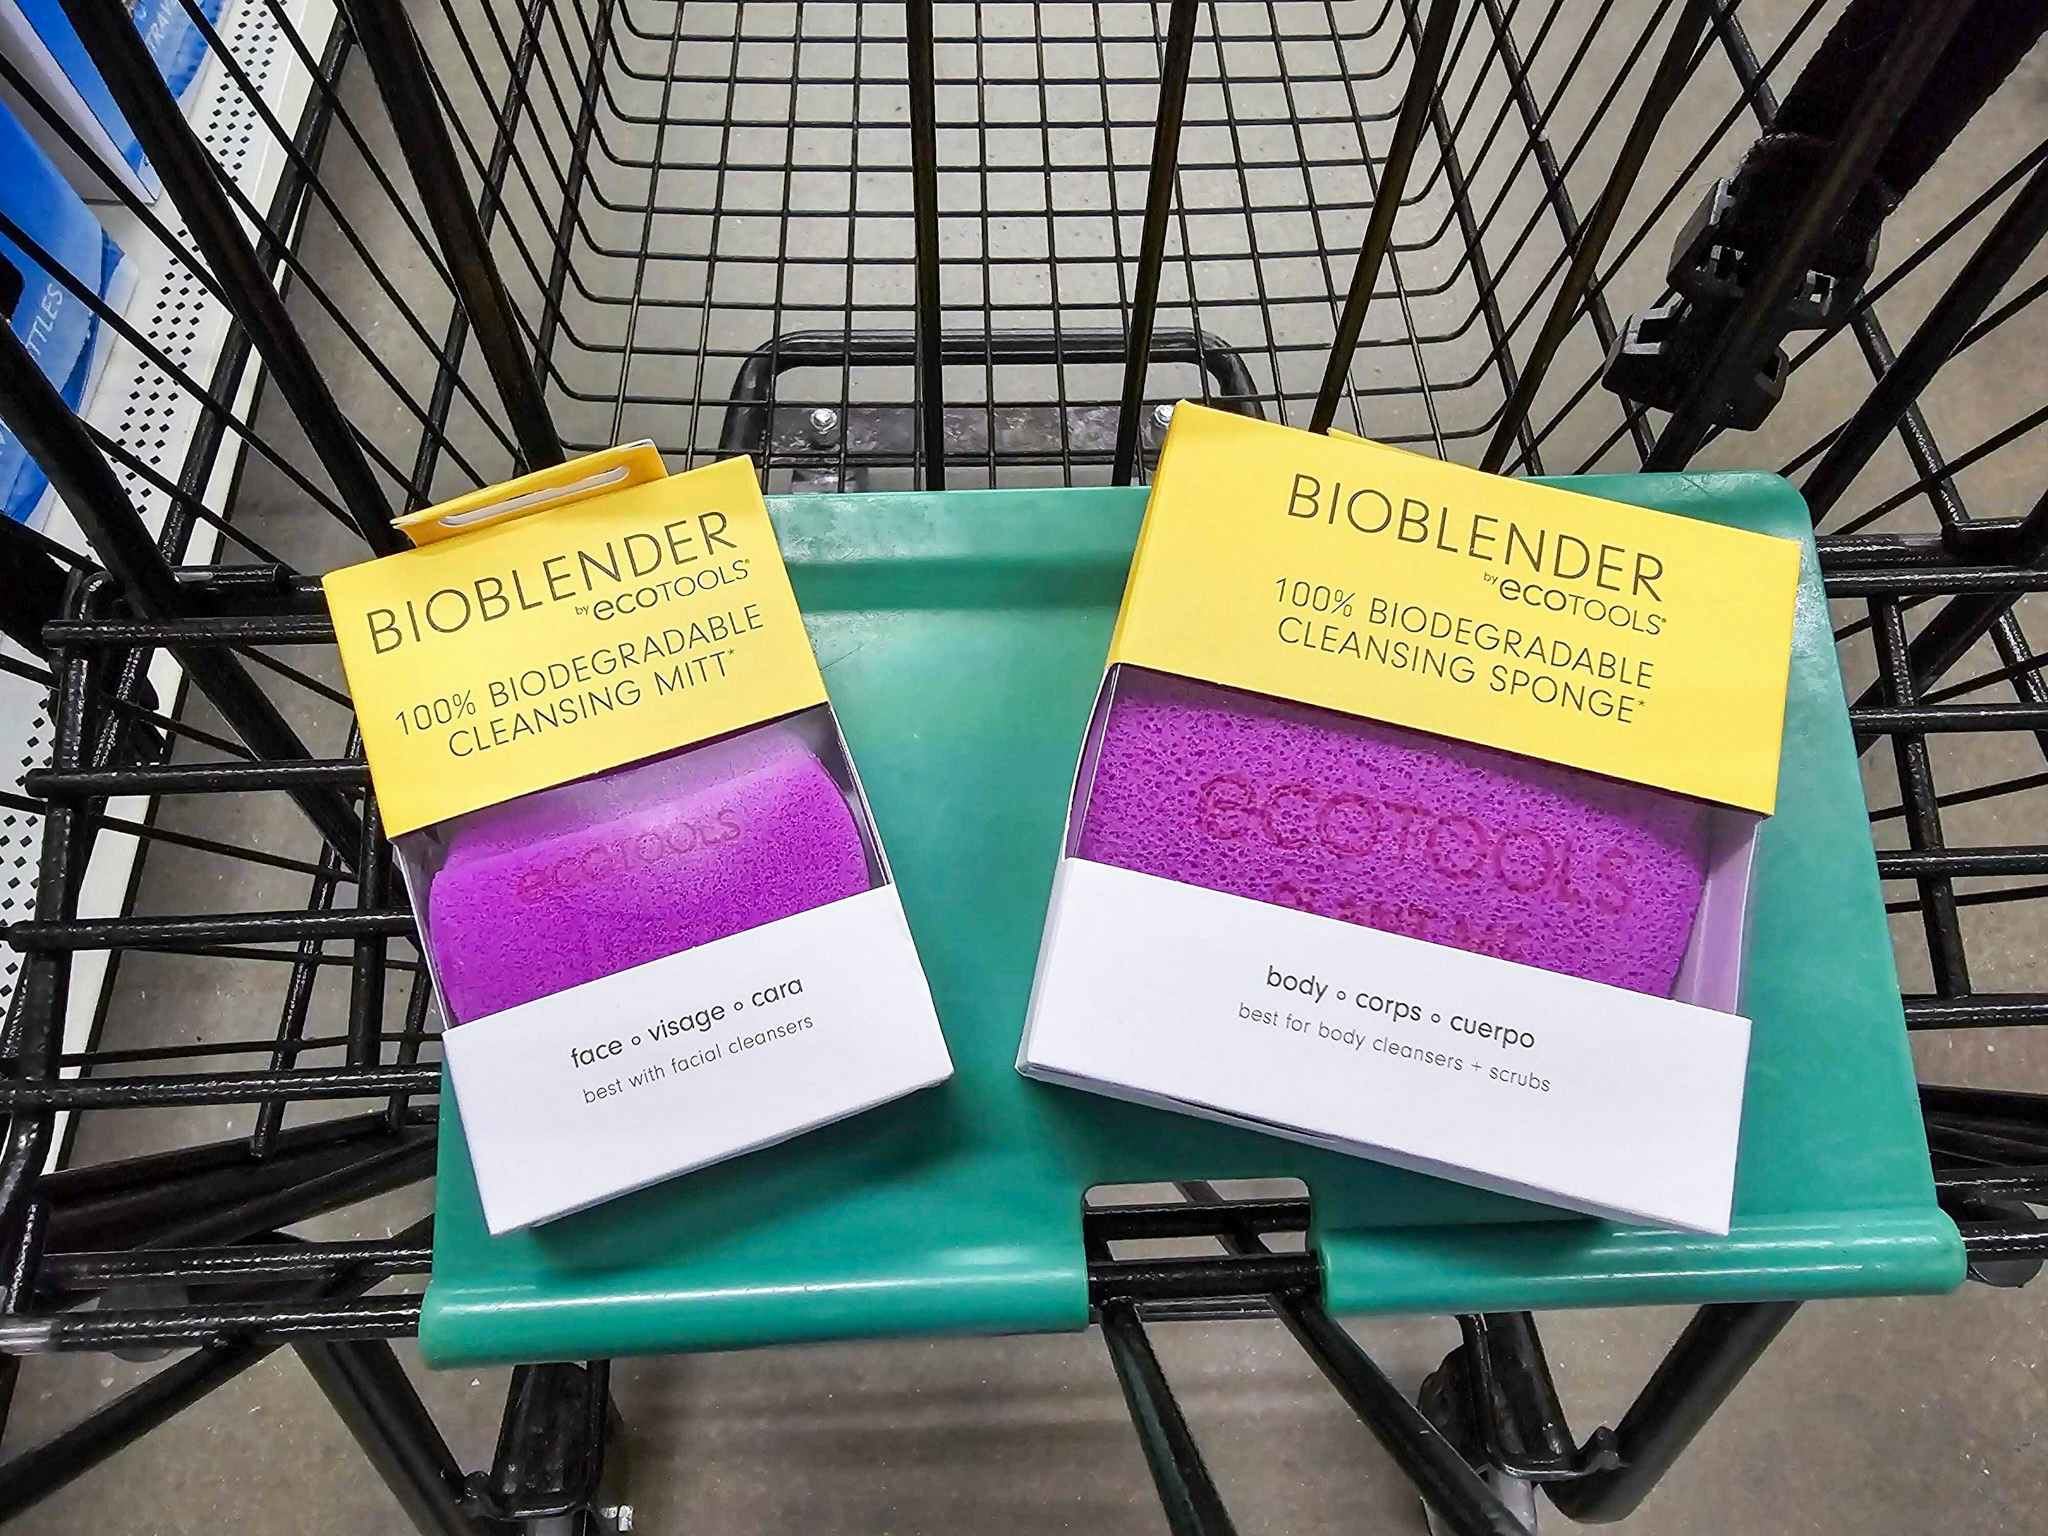 beauty cleansing sponge and cleansing mitt in a shopping cart